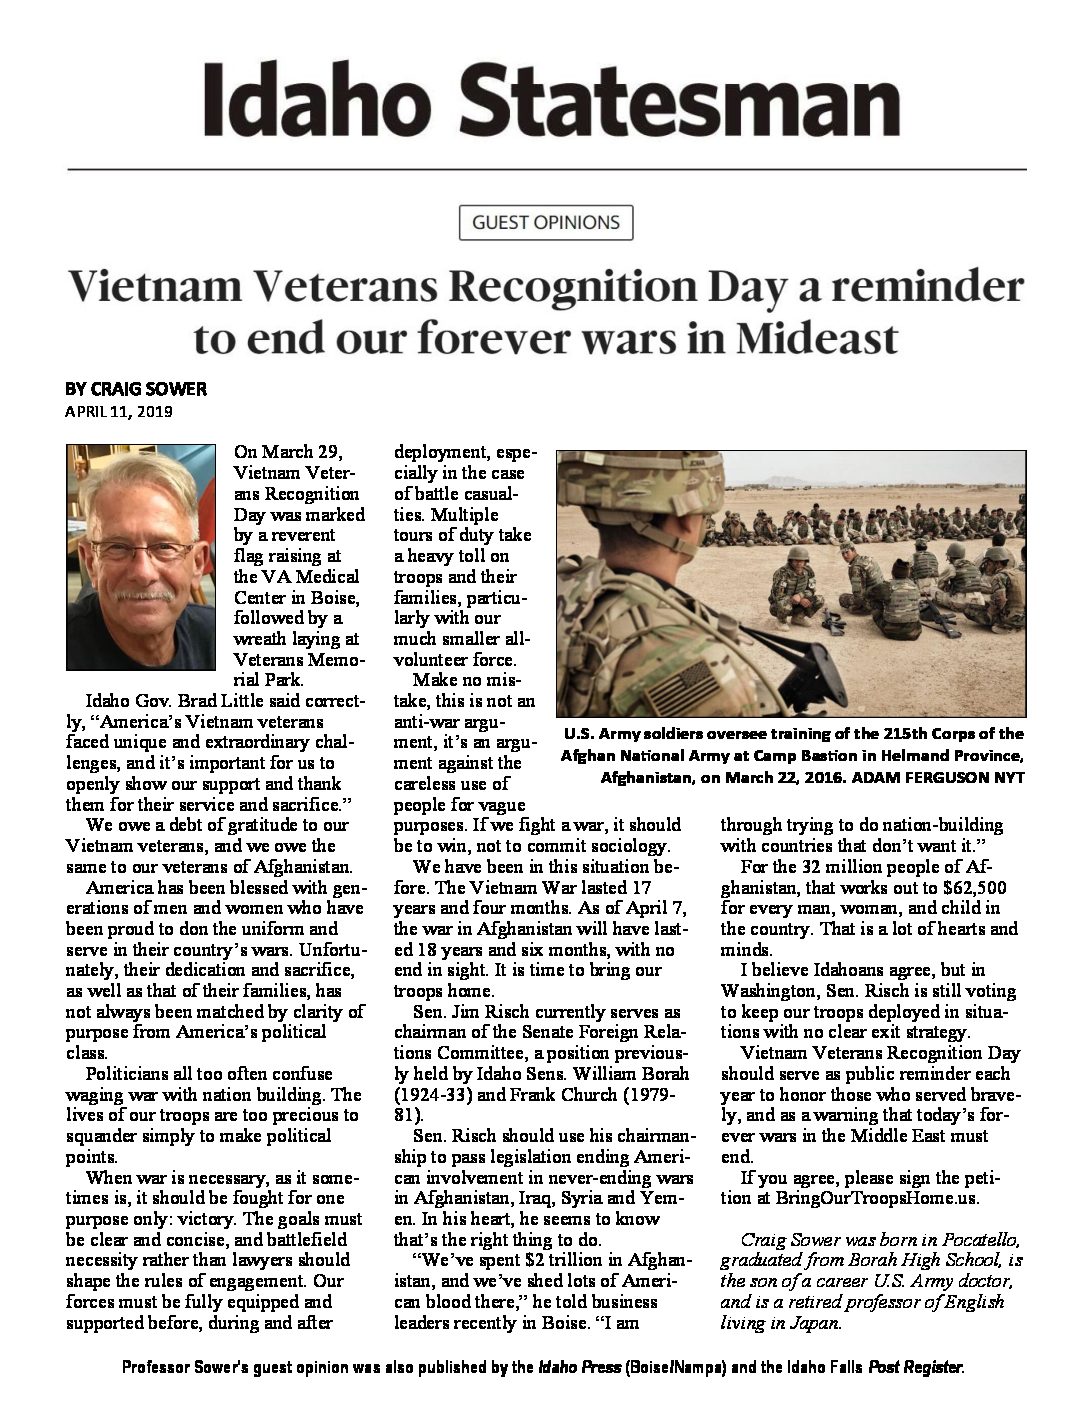 Idaho Statesman – Vietnam Veteran Recognition Day a reminder to end our forever wars in Mideast